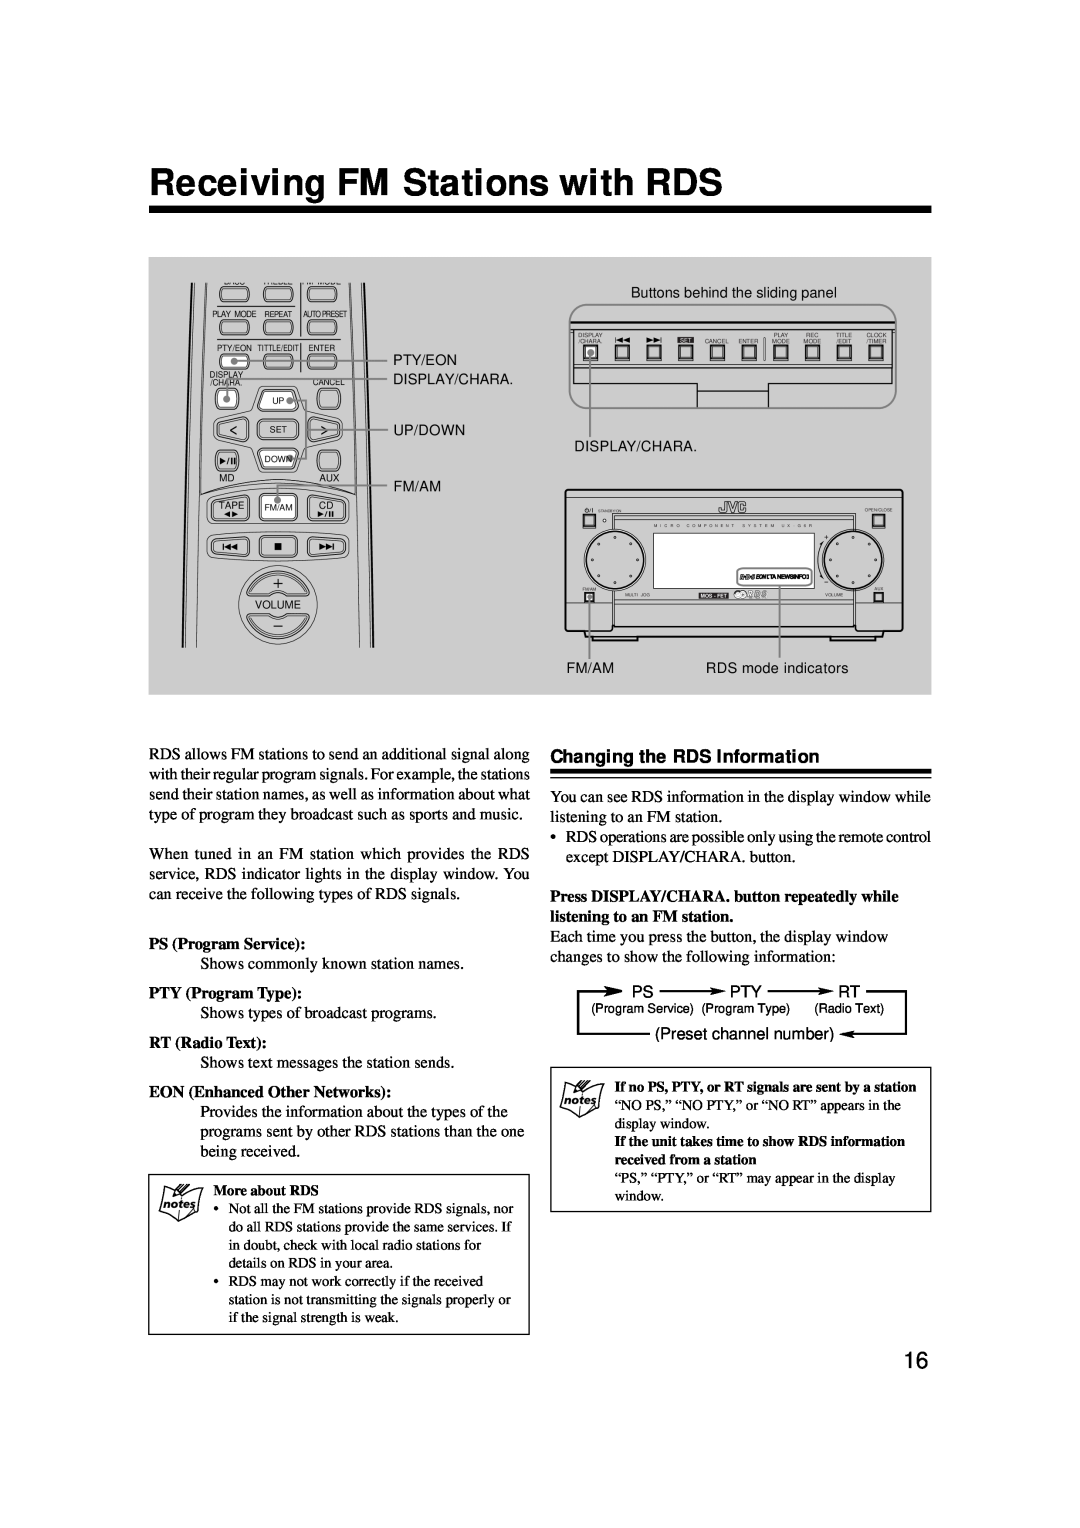 JVC TD-UXG6, XT-UXG6R Receiving FM Stations with RDS, Changing the RDS Information, PS Program Service, PTY Program Type 